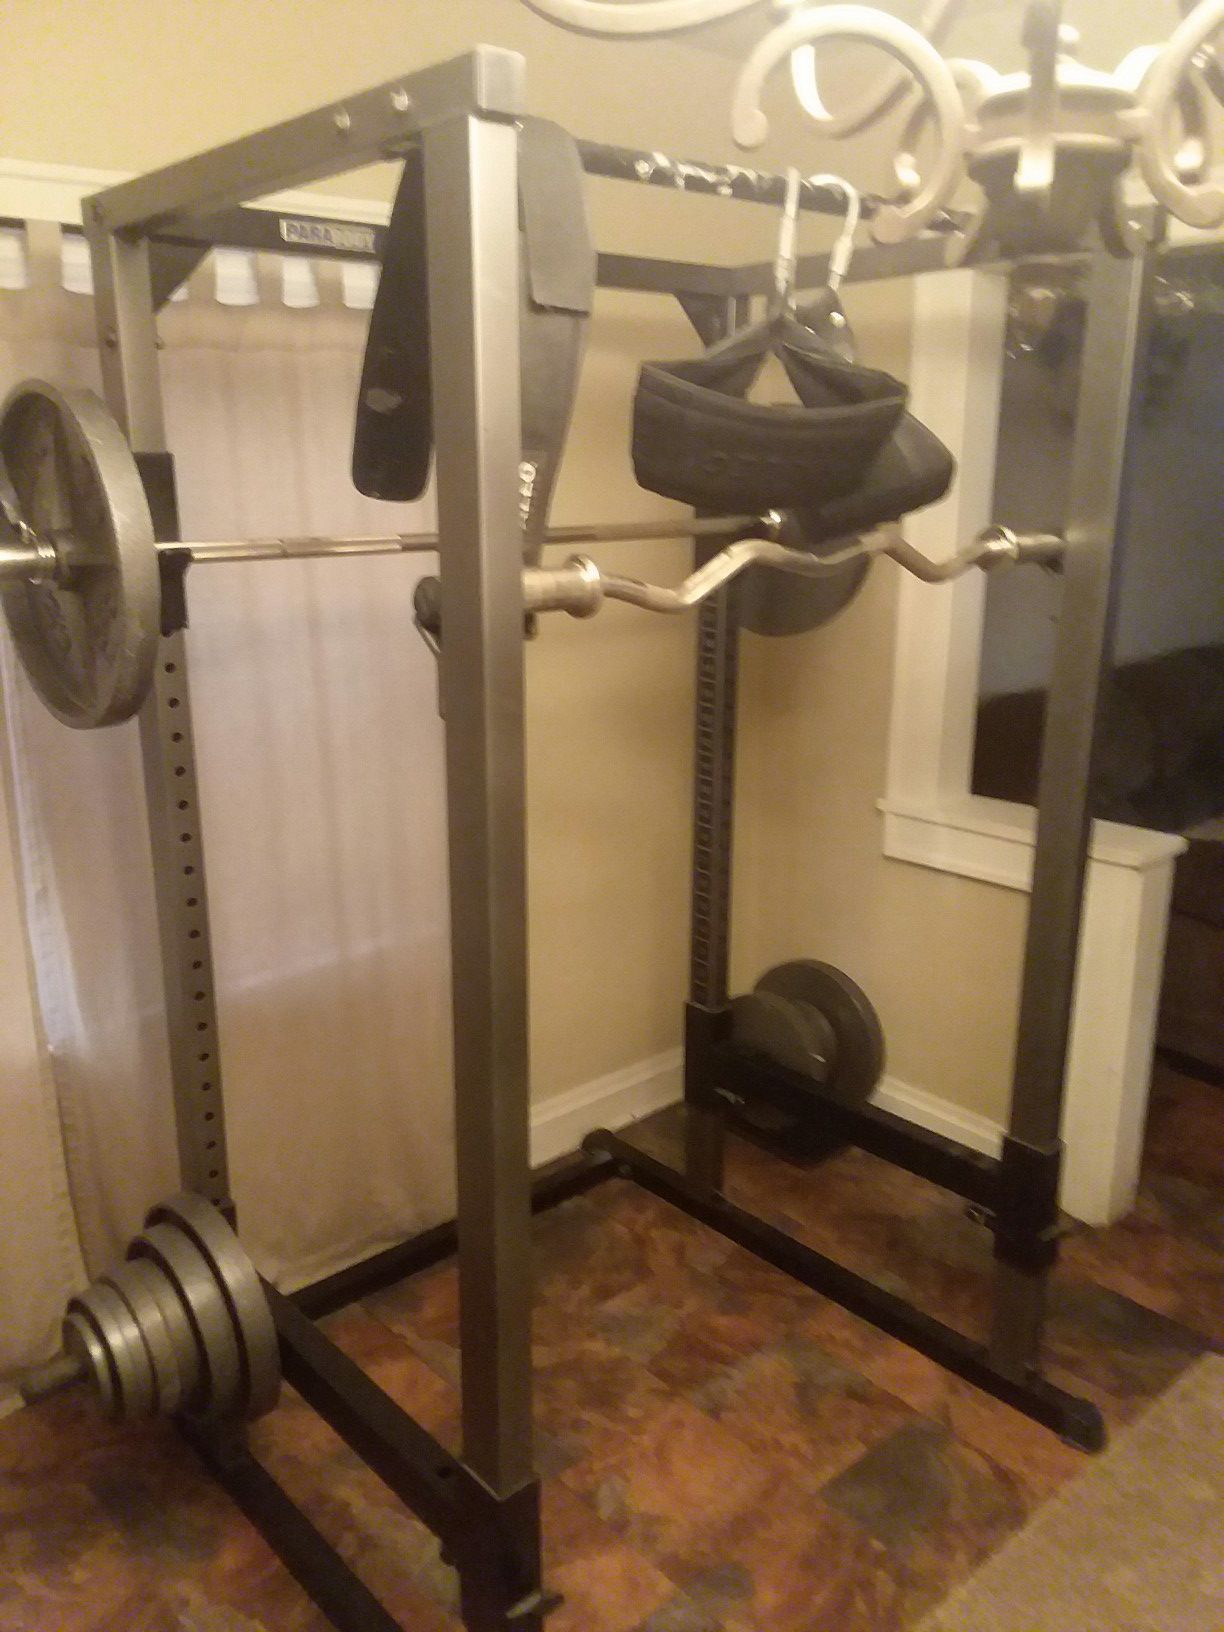 Parabody squat rack home gym can a 70 lb weights 2 weight bars and more